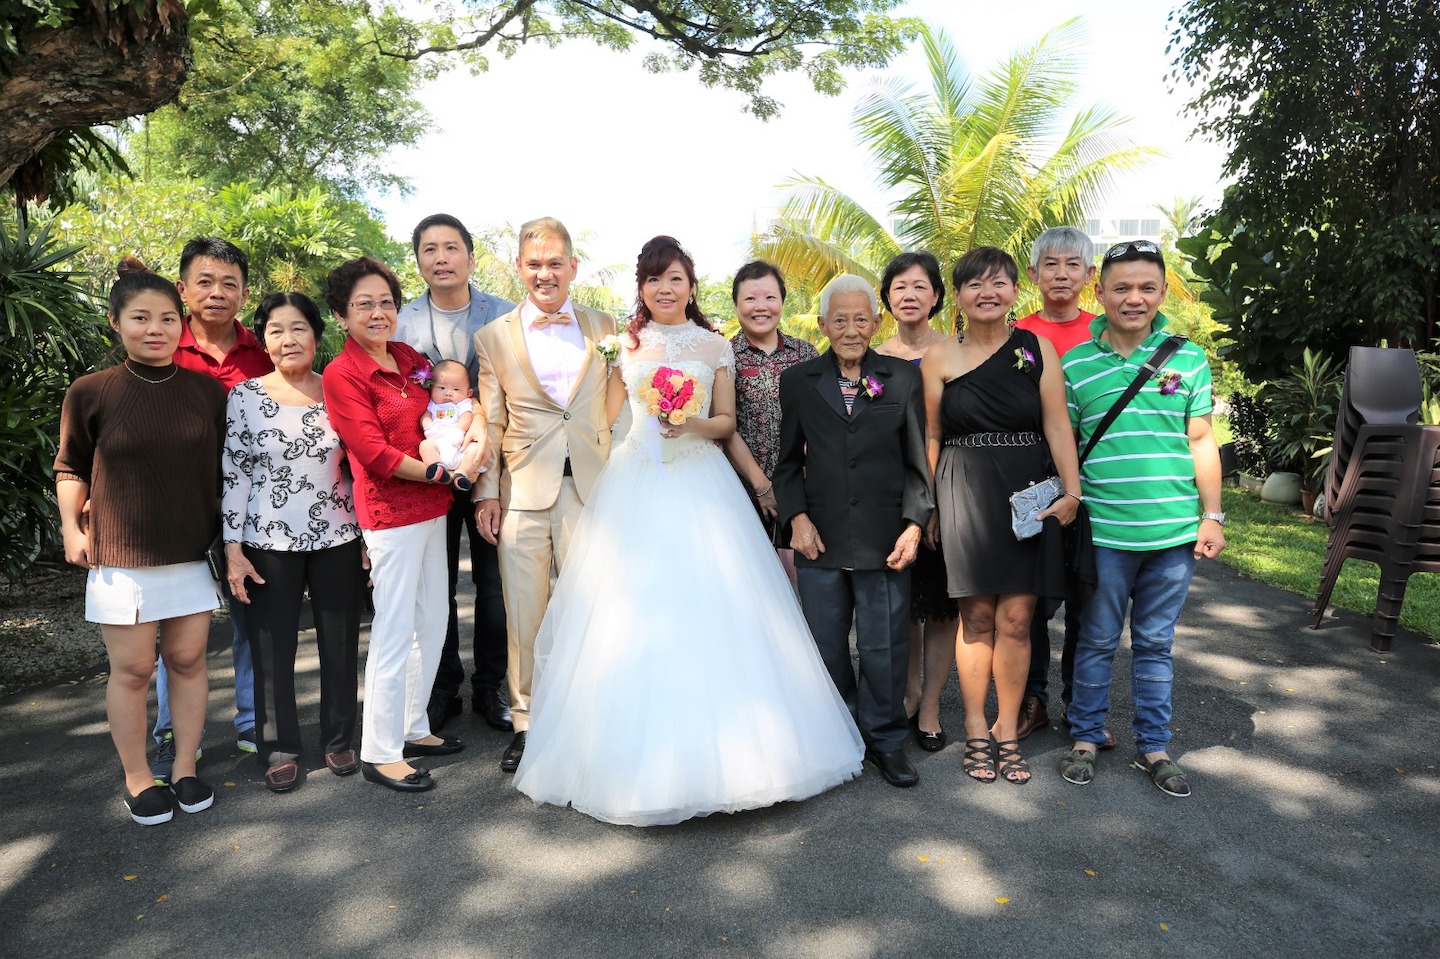 Chai Lai and Bee Leng with their family members after their wedding ceremony in Breakthrough Missions on May 5, 2018.